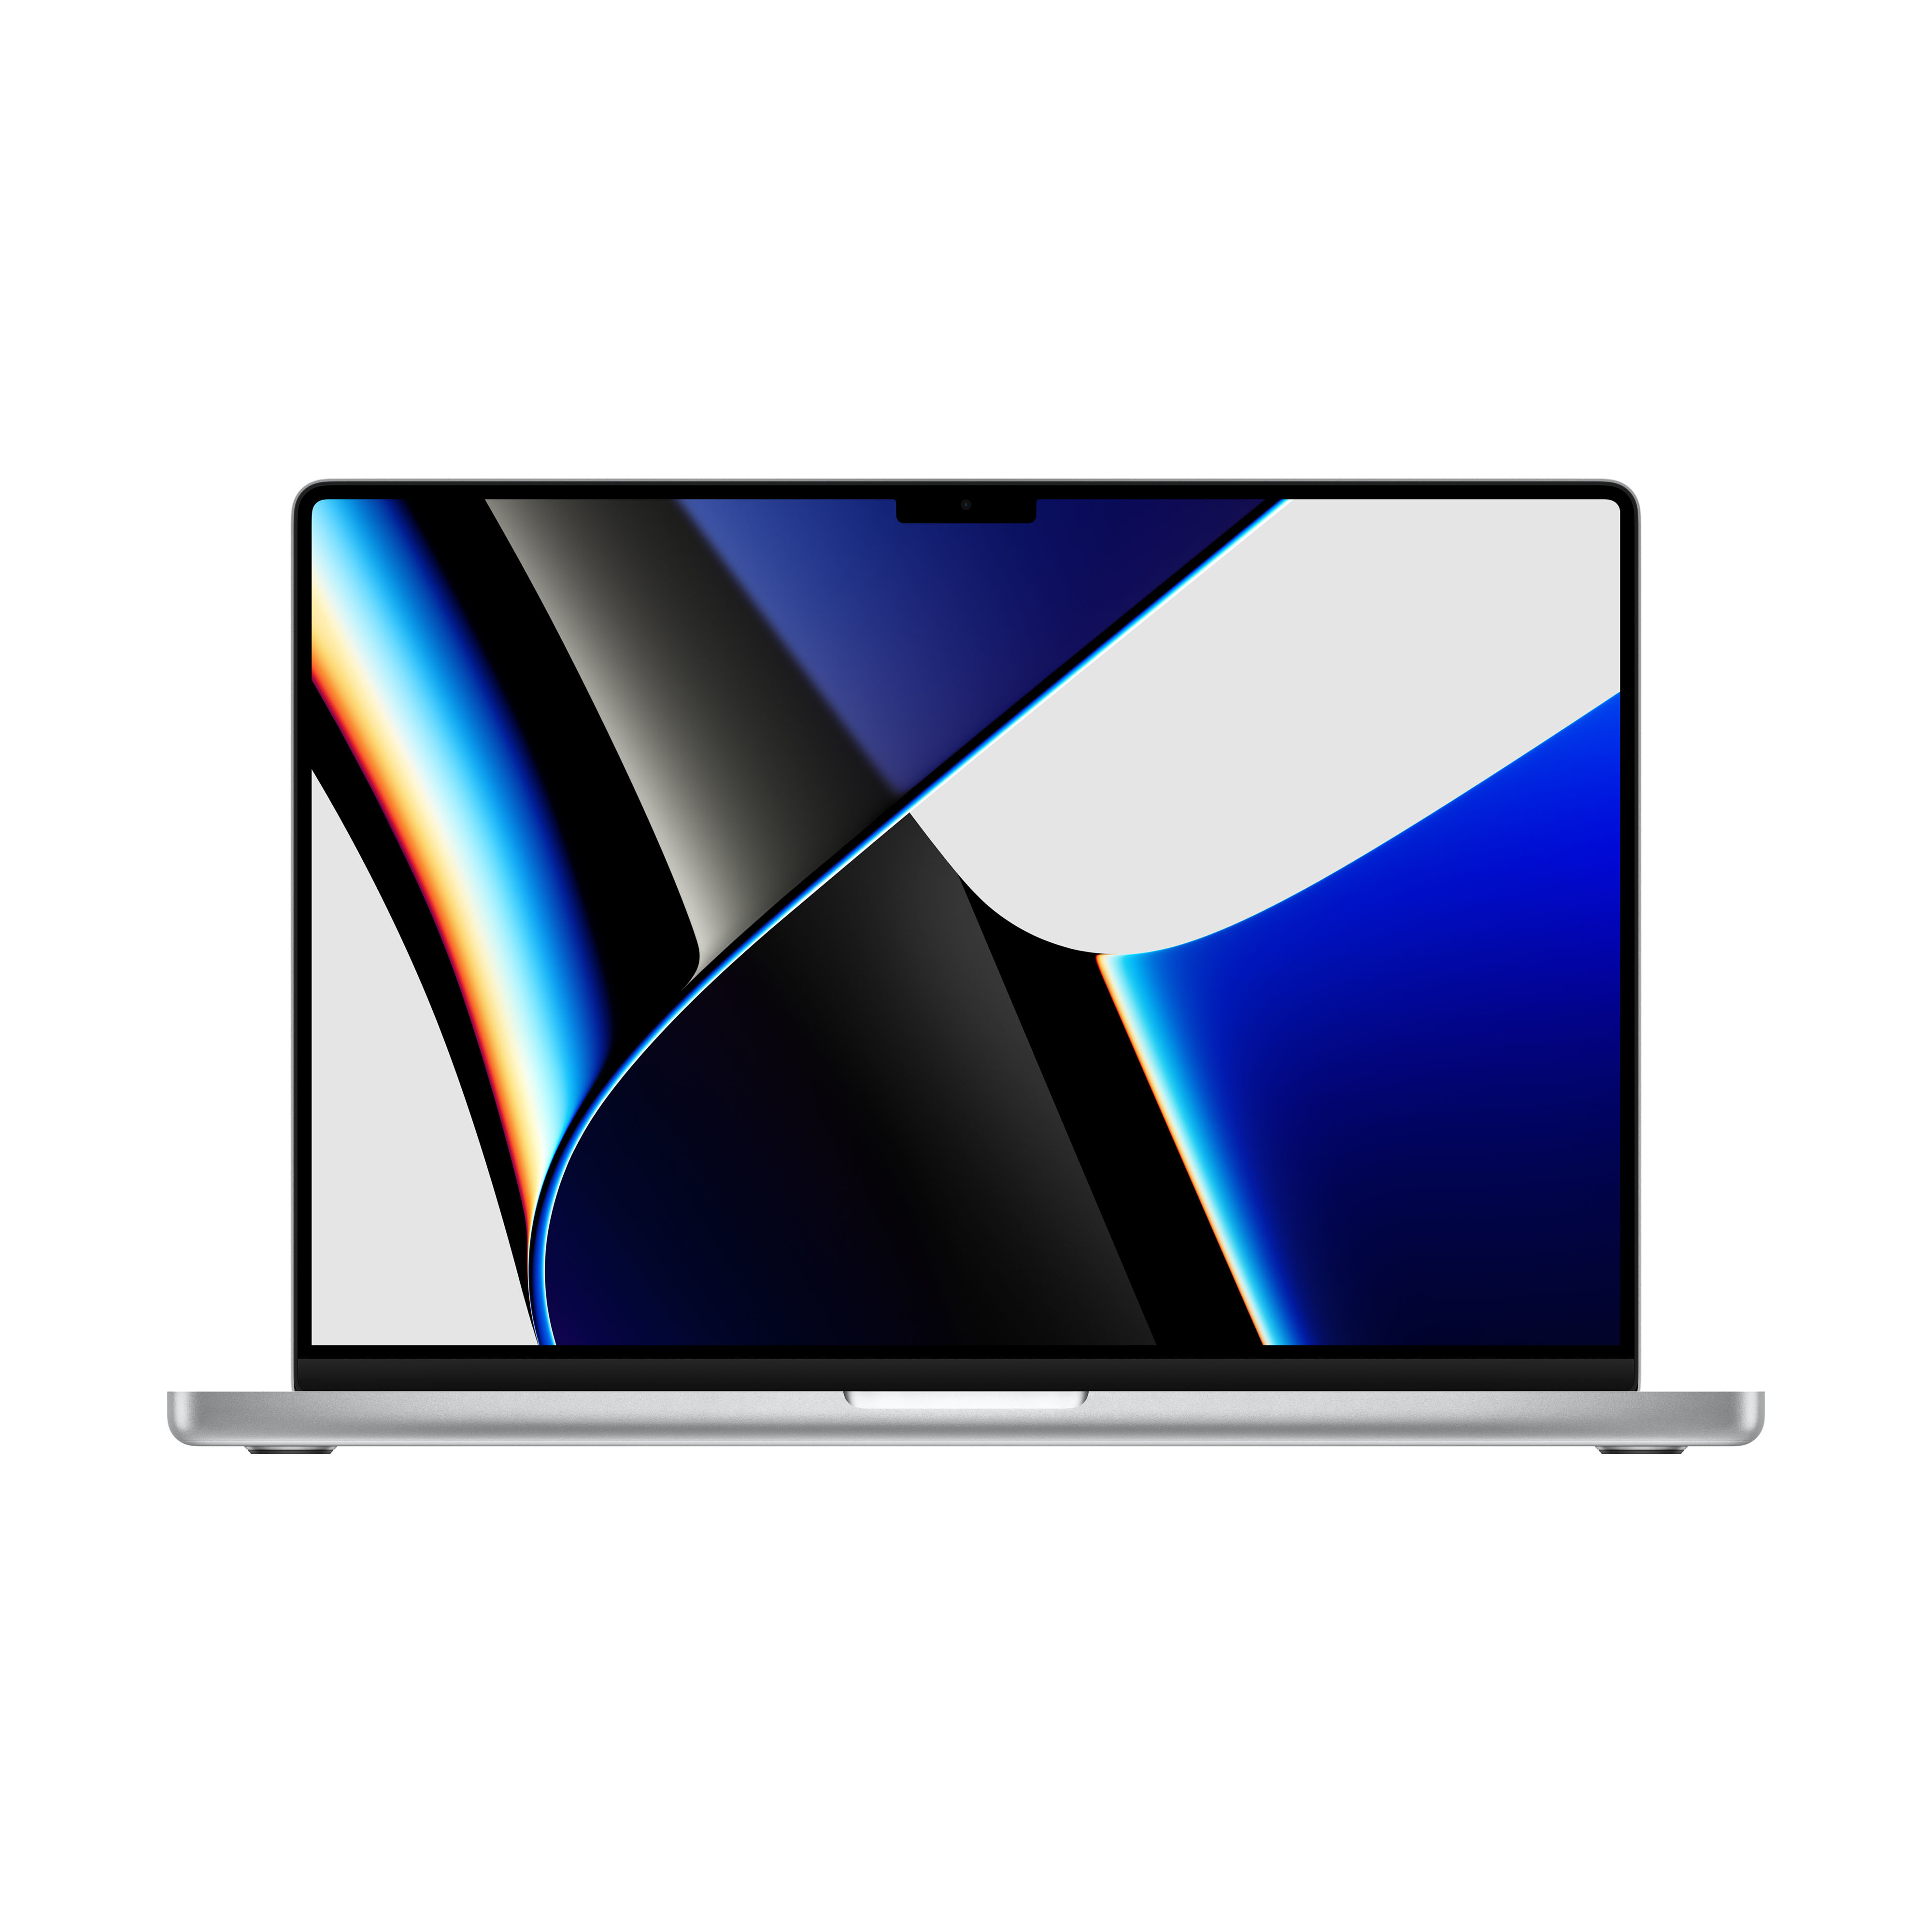  16inch (2021) MacBook Pro  M1 Pro chip with 10-core CPU and 16-core GPU 512GB SSD Silver Qwerty